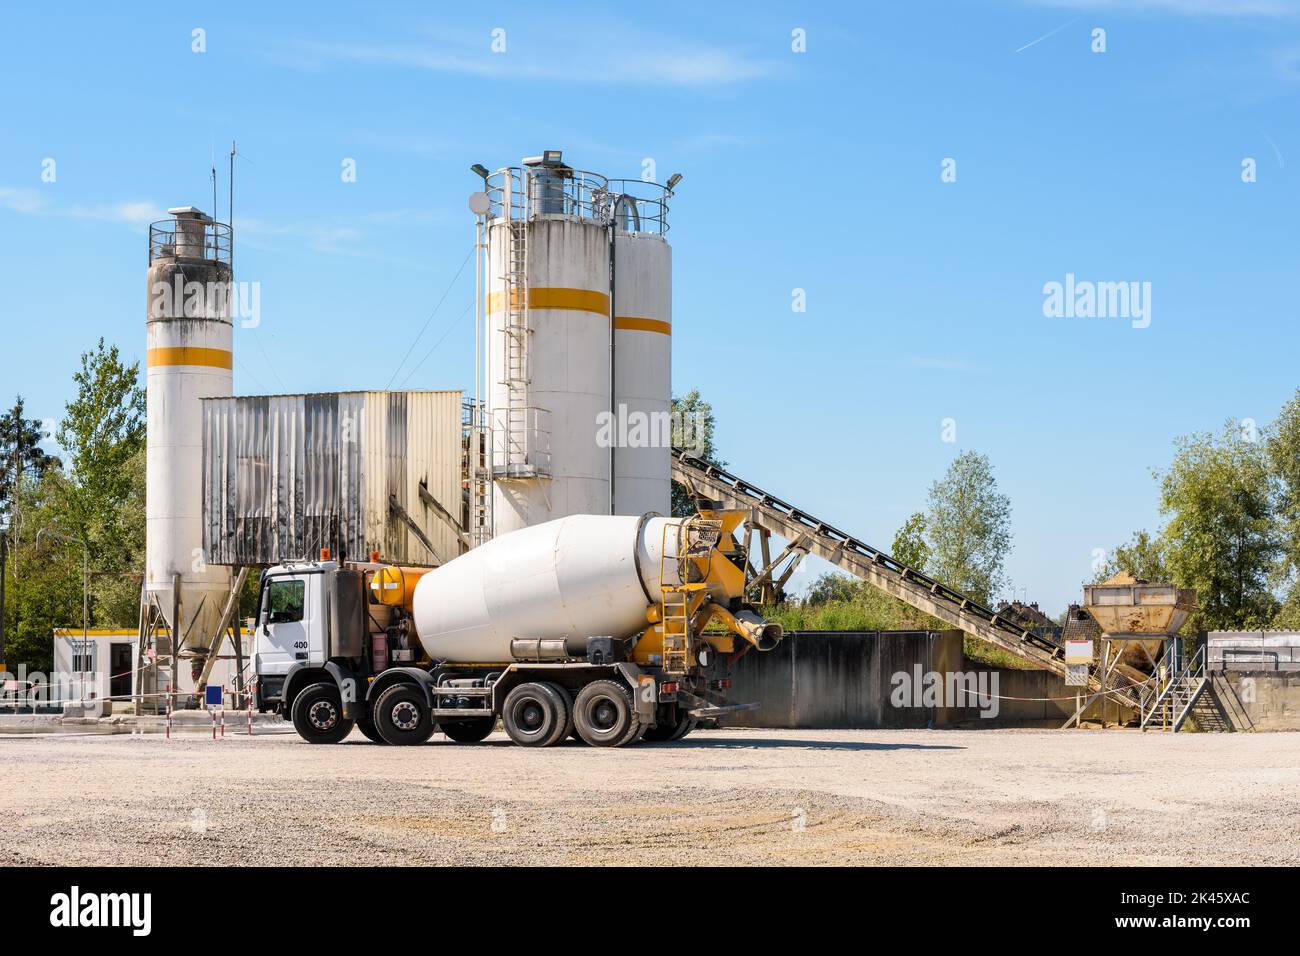 A concrete mixer truck is parked next to a sand silo in a quarry on a sunny day. Stock Photo